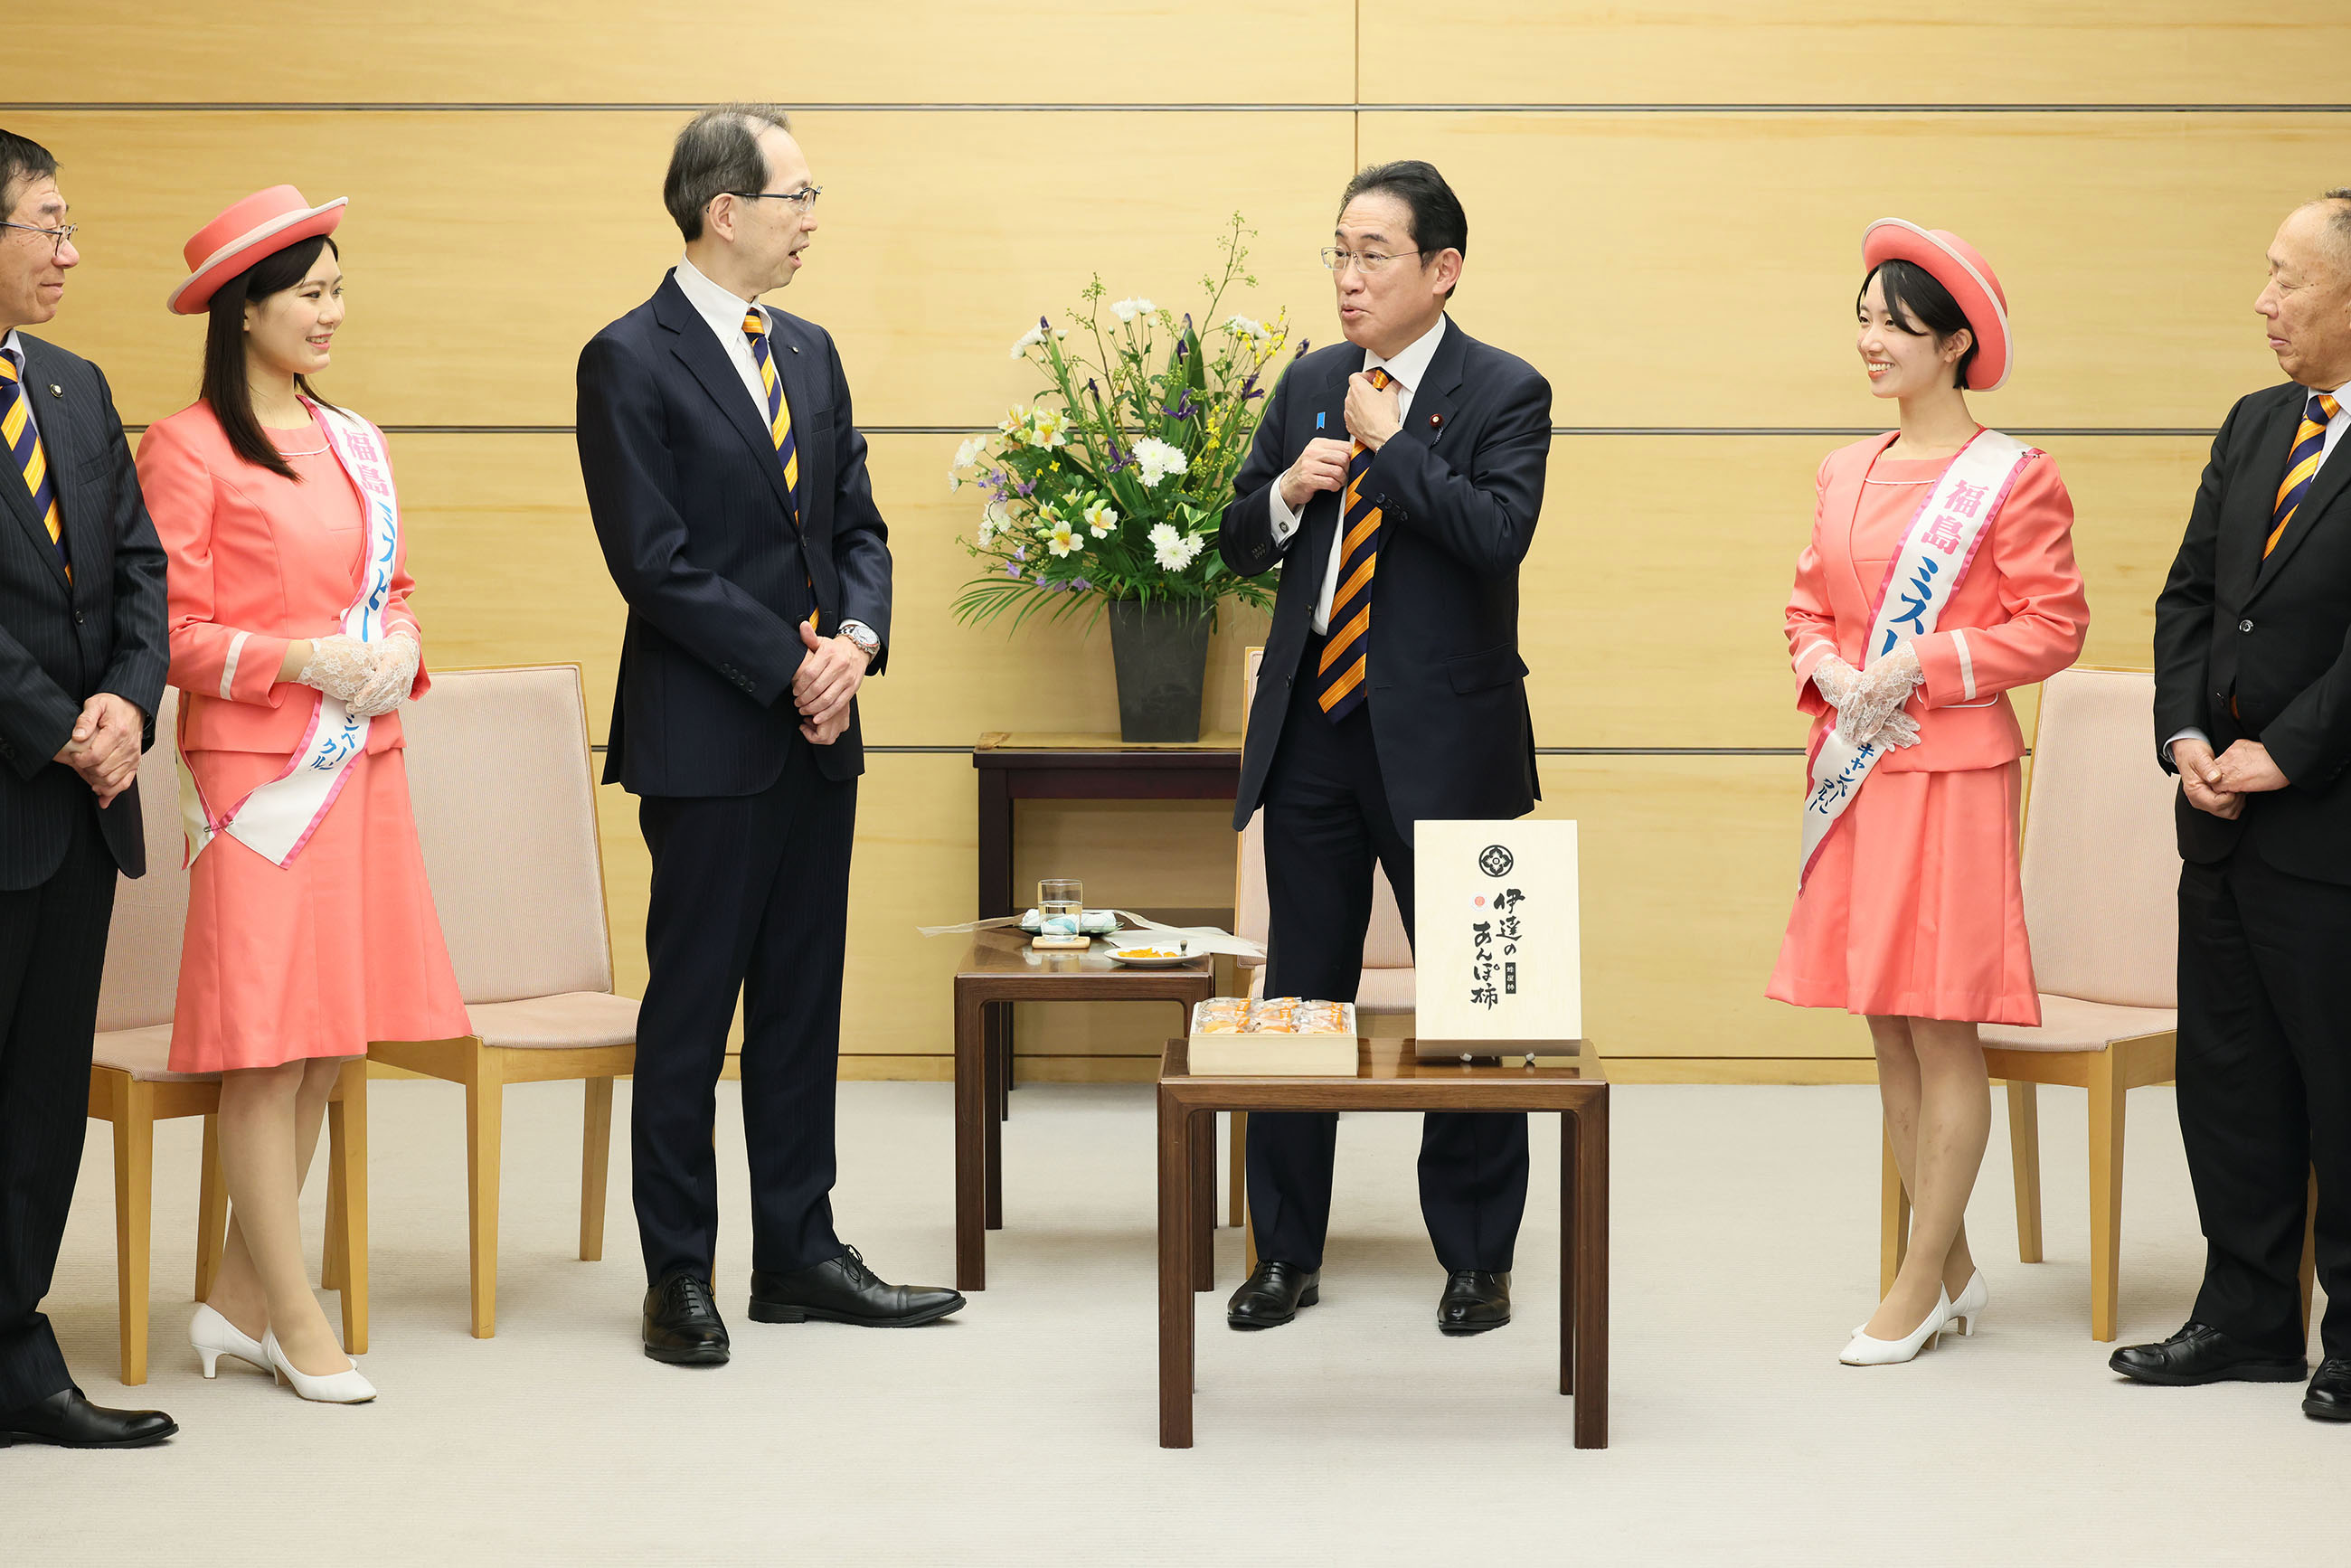 Prime Minister Kishida being presented with Anpogaki persimmons (4)